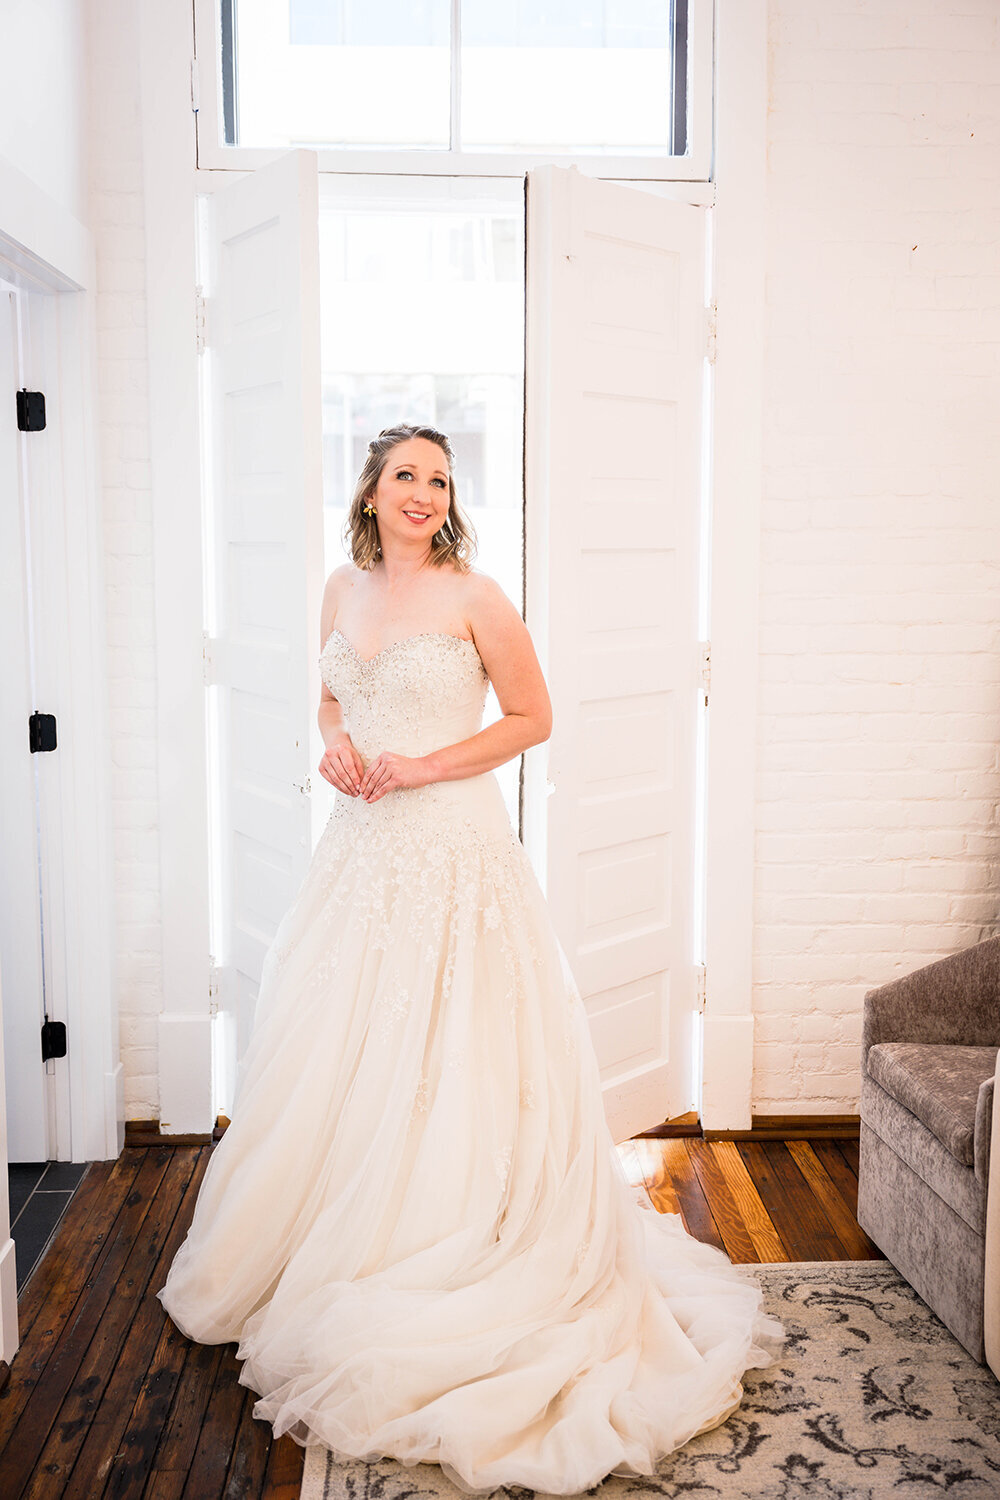 A bride stands in front of a window with large doors inside a Fire Station One Boutique Hotel room in Downtown Roanoke, Virginia for a formal portrait.